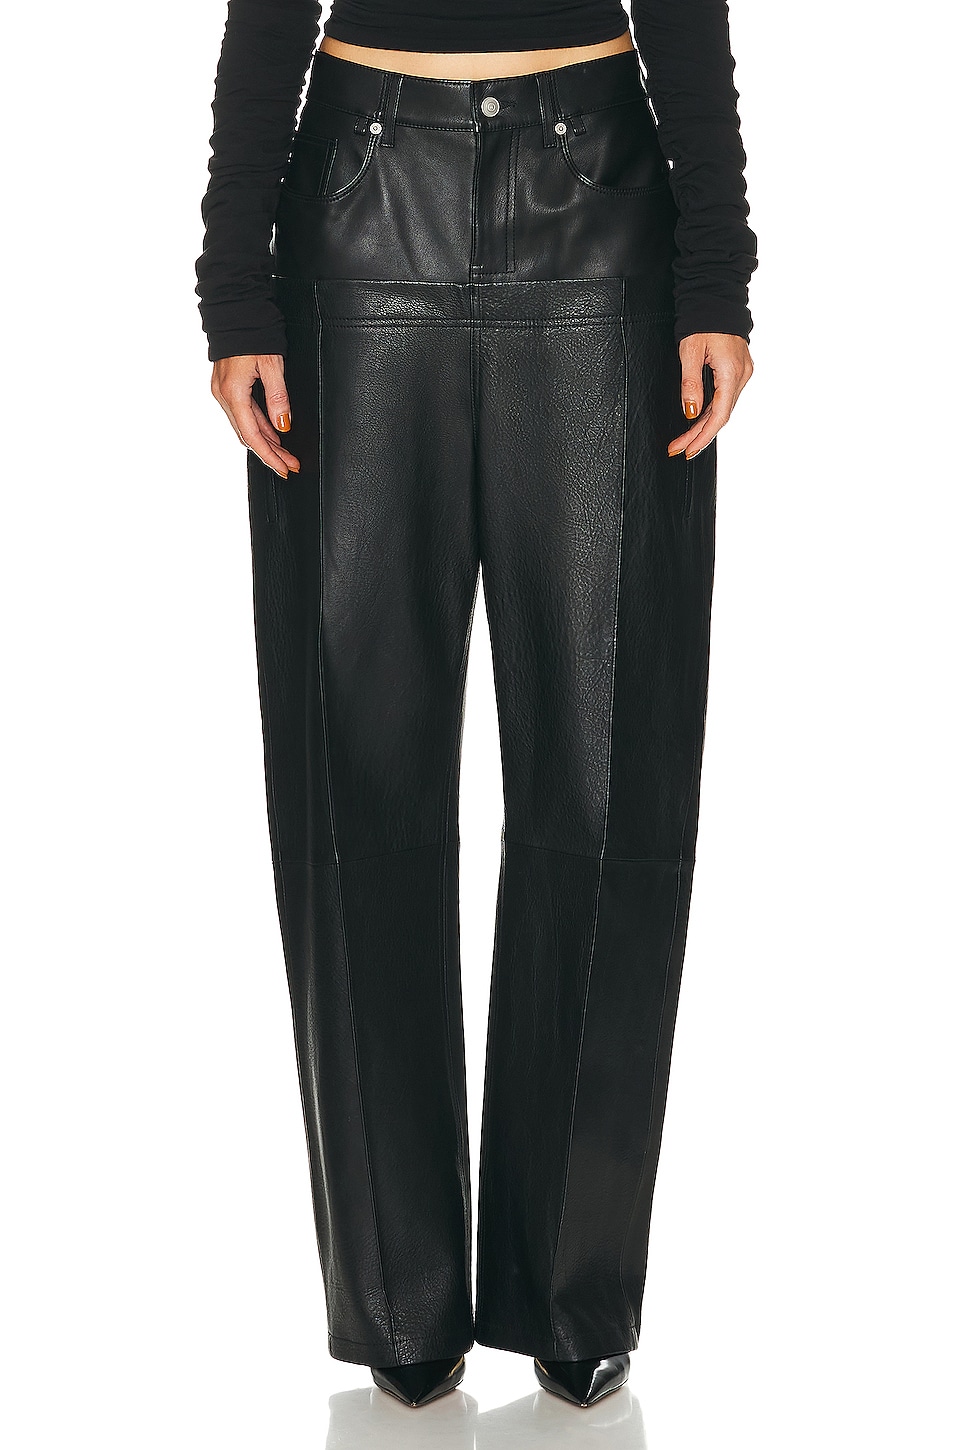 Image 1 of EZR Double Waistband Pant in Black